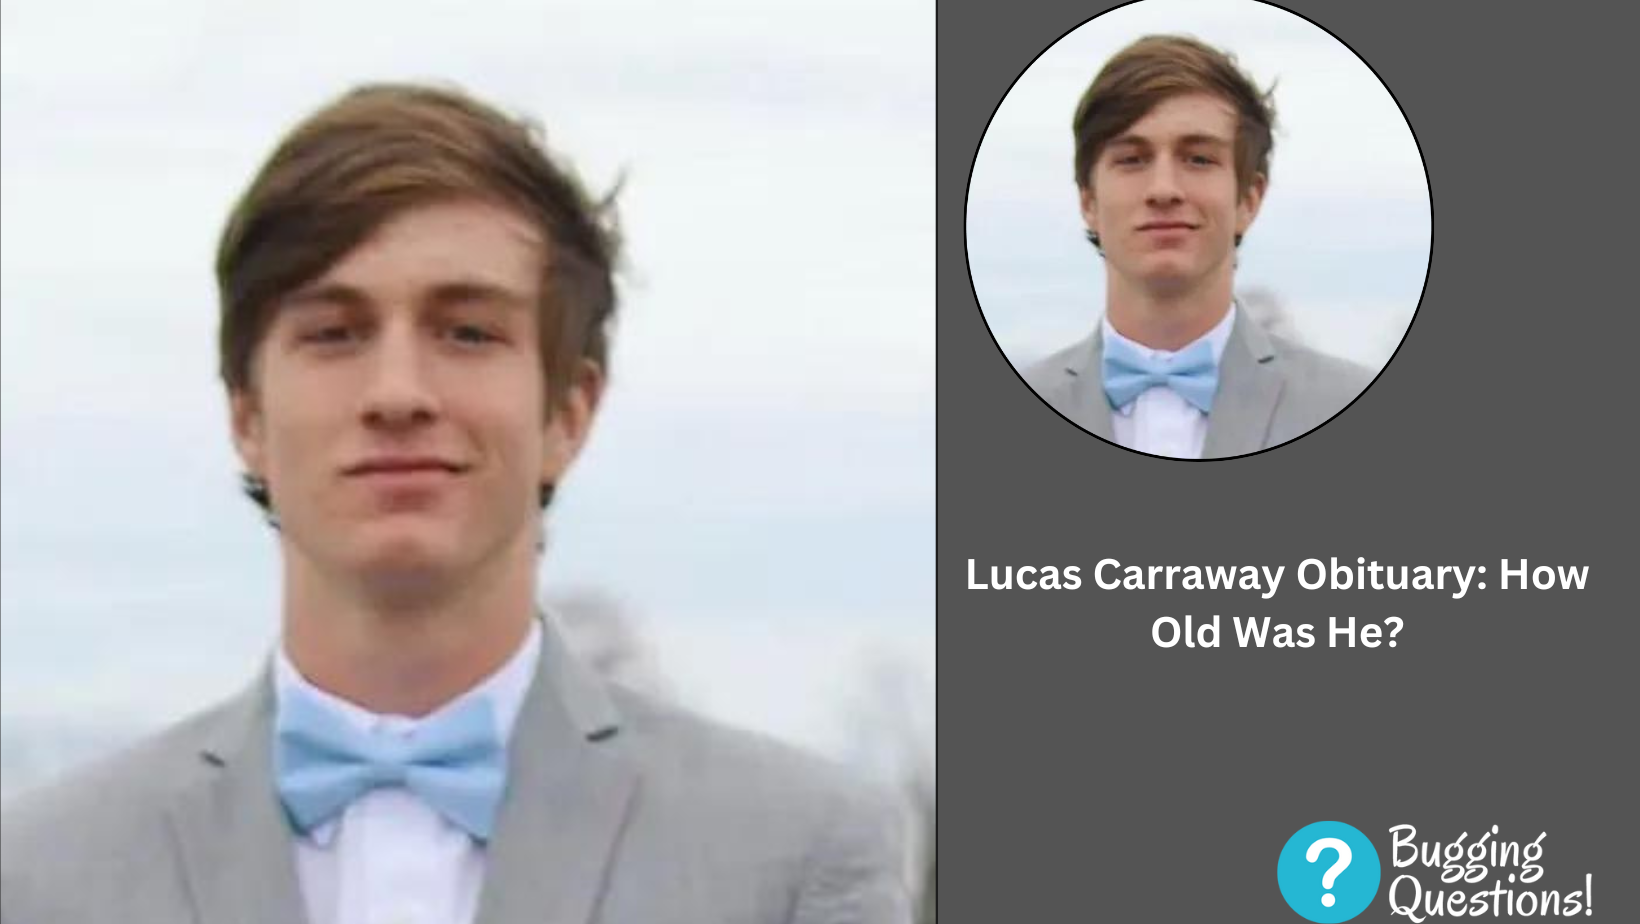 Lucas Carraway Obituary: How Old Was He?